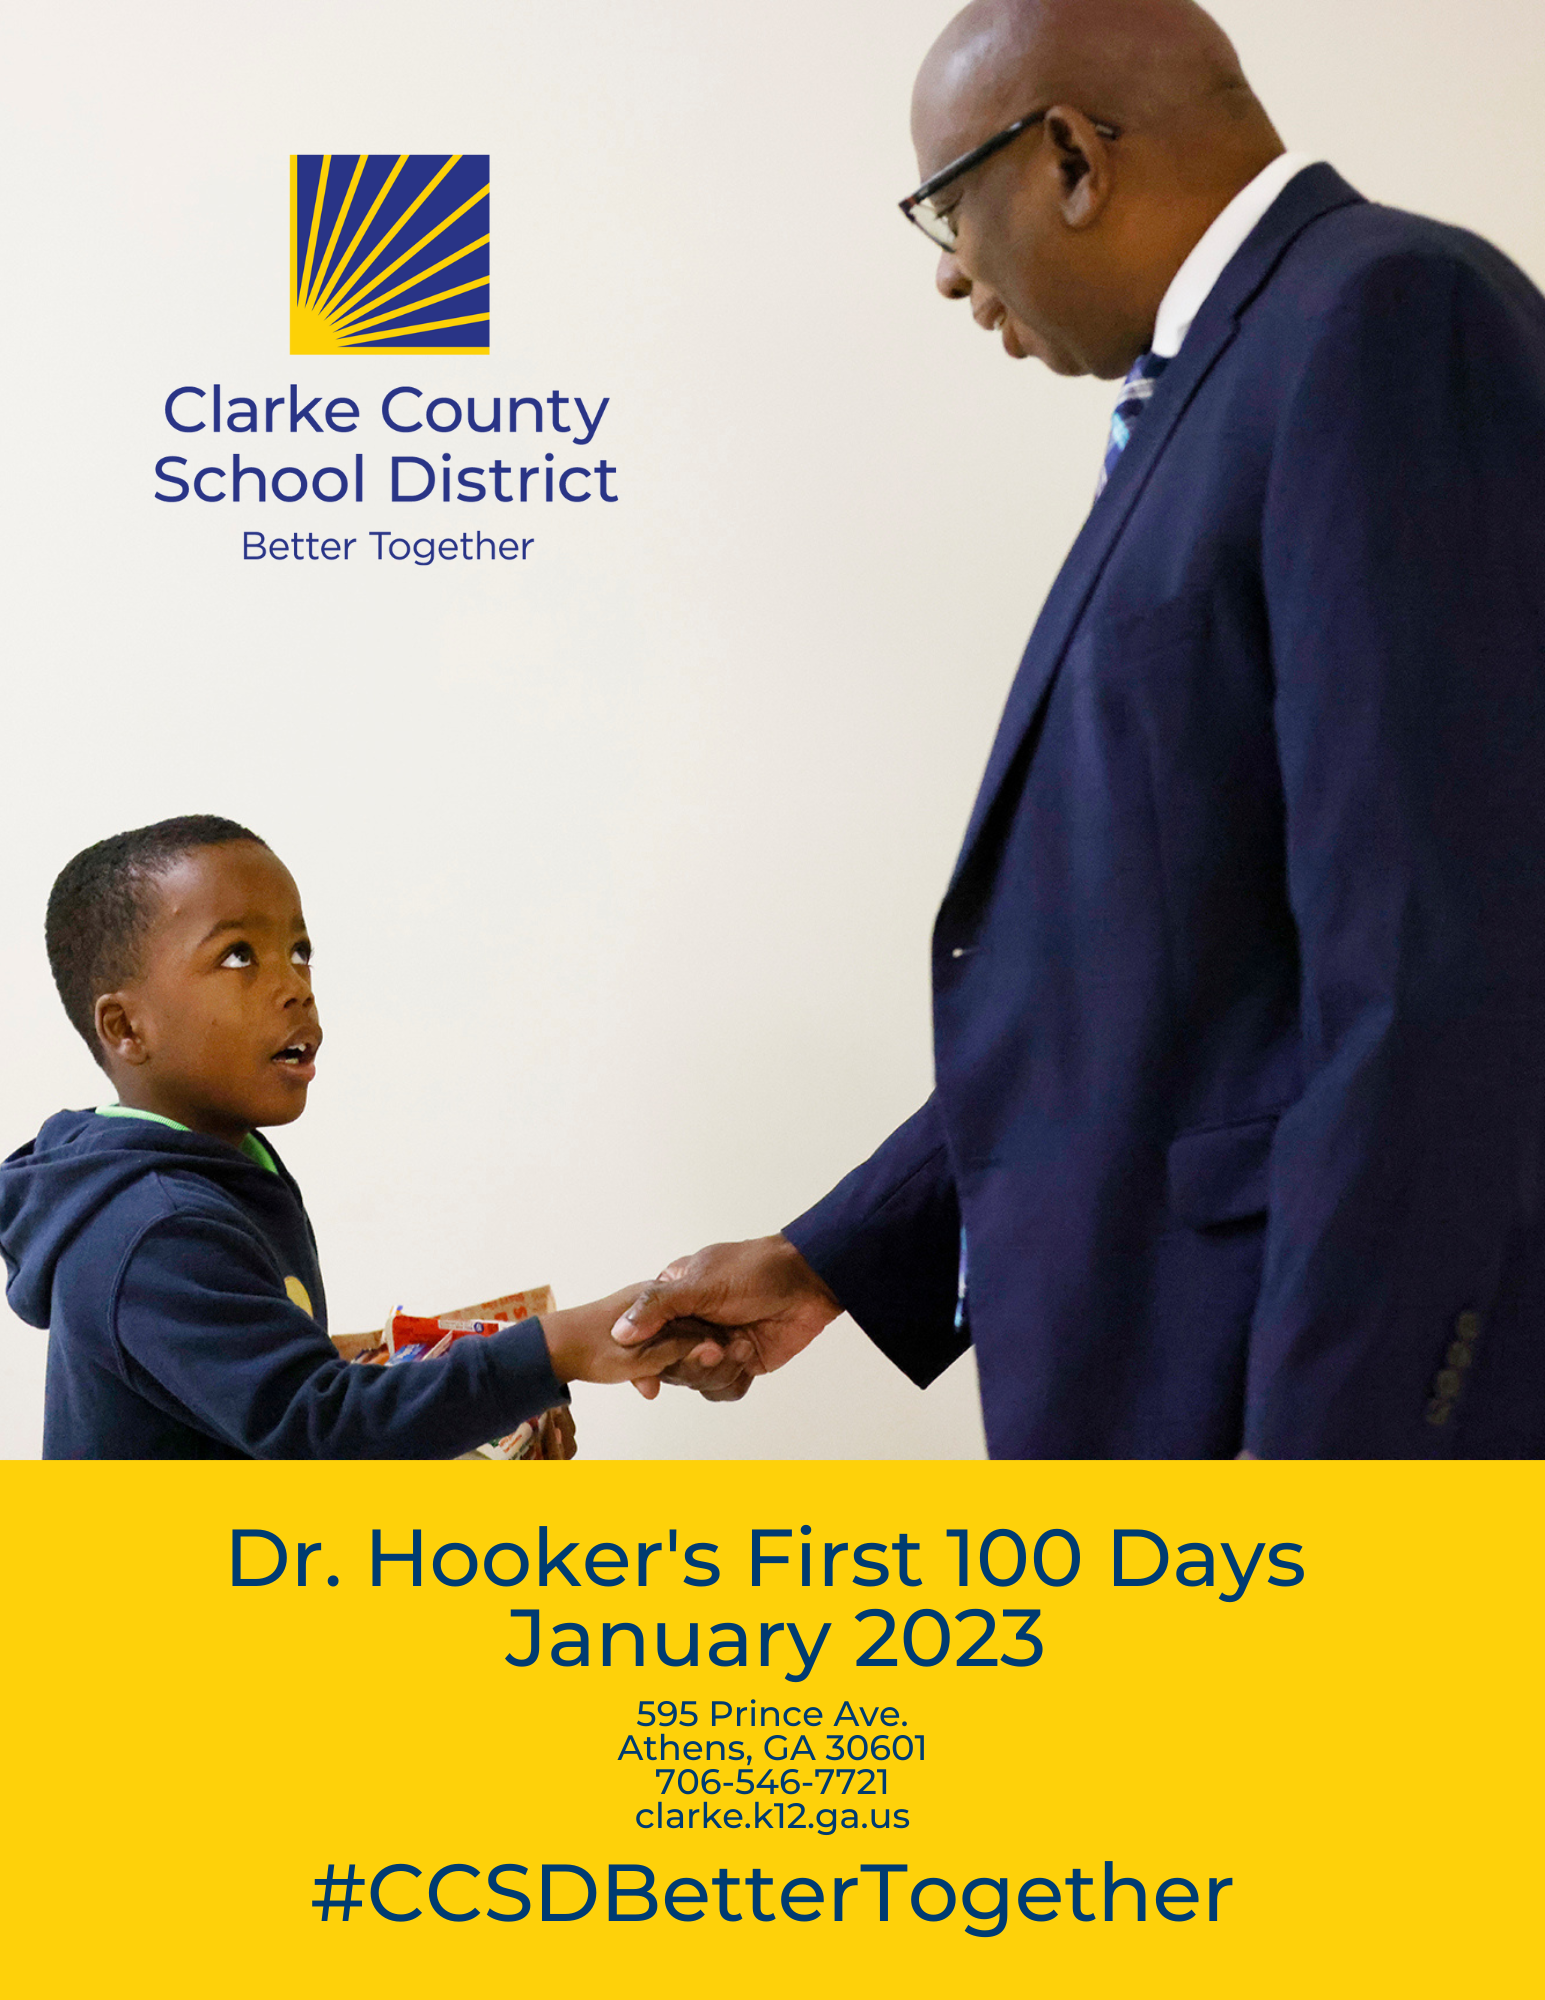 Read Dr. Hooker's First 100 Days Report